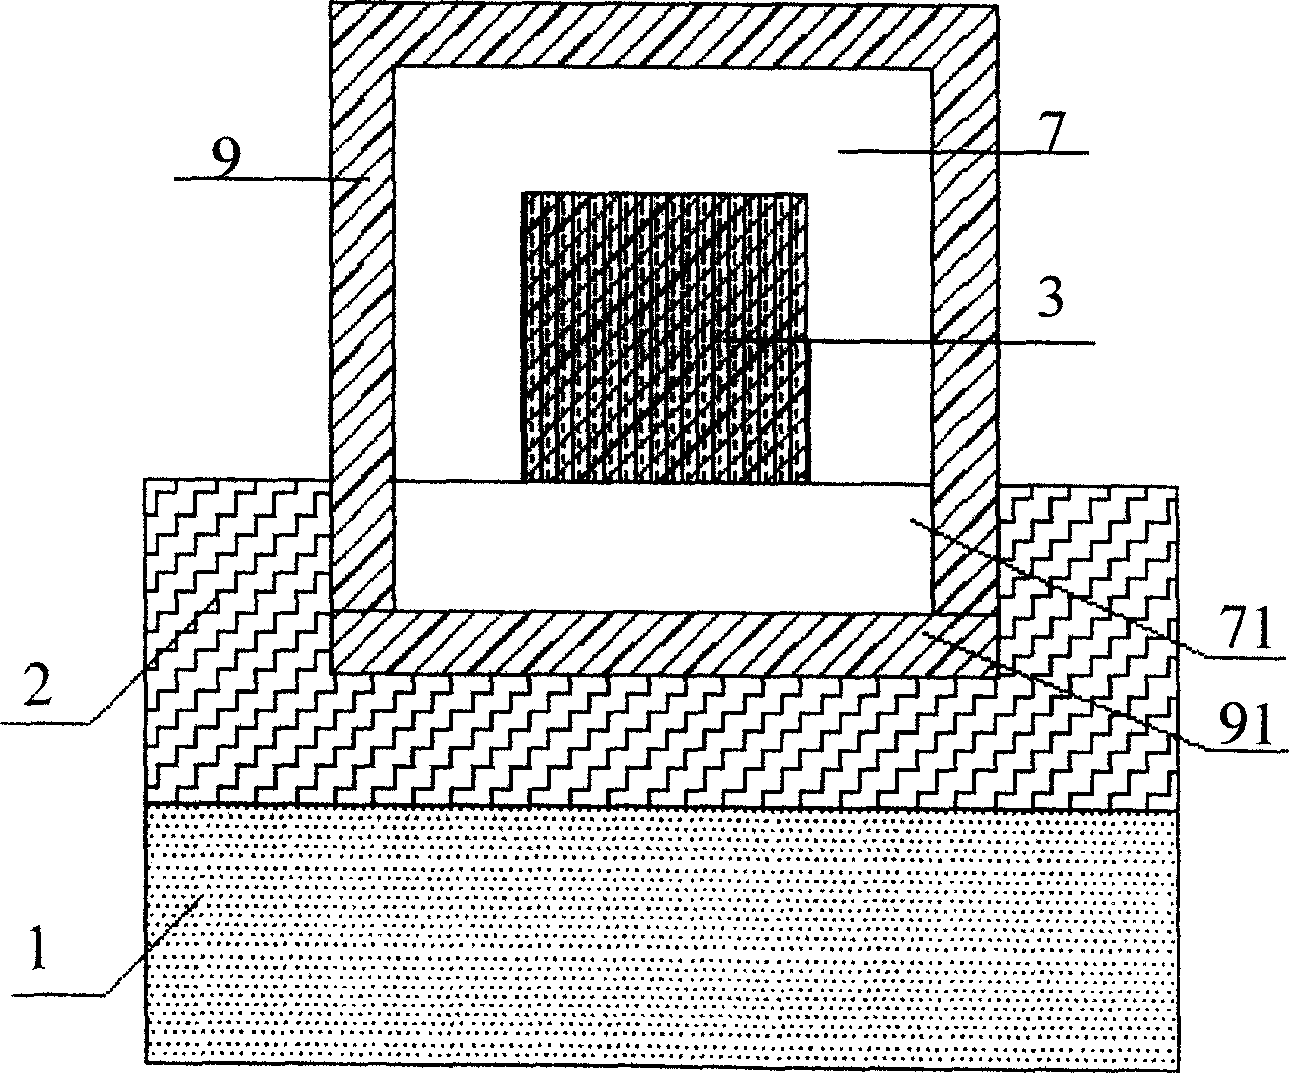 Three-dimensional multi-gate high-voltage N type transverse double-diffused metal-oxide semiconductor device